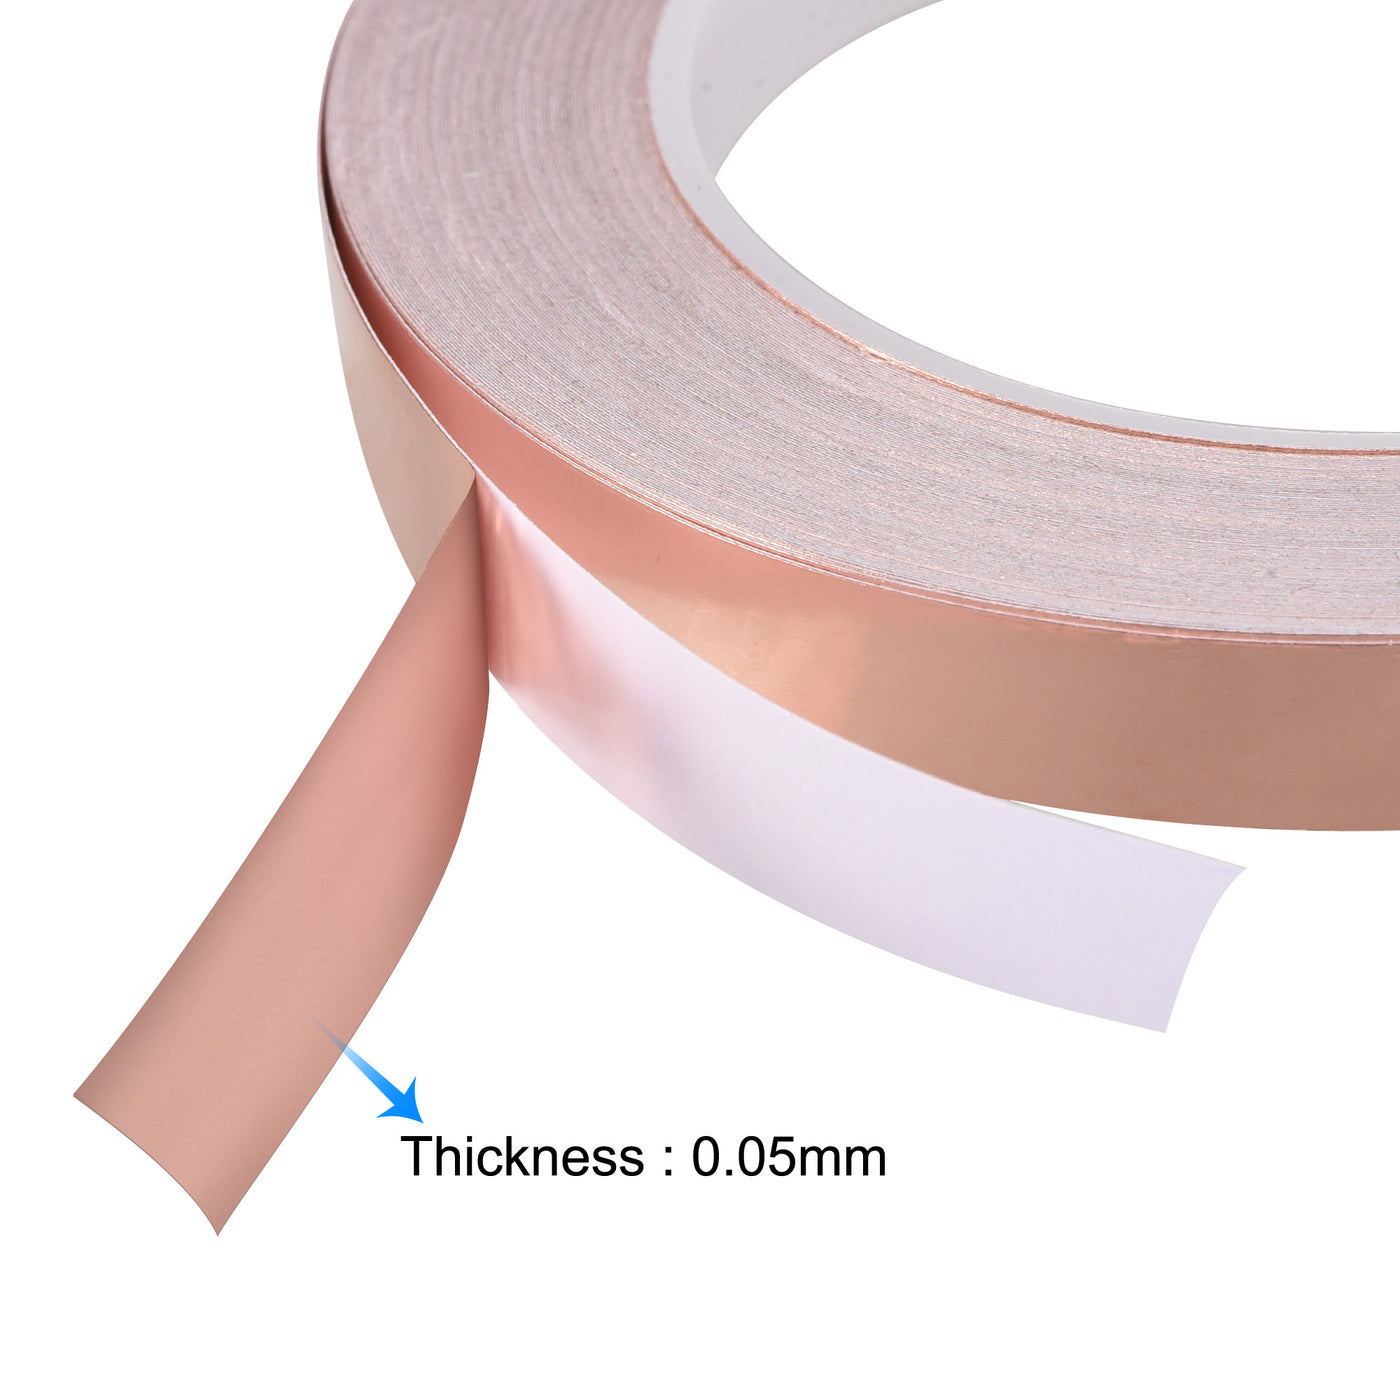 uxcell Uxcell Single-Sided Conductive Tape Copper Foil Tape 30mm x 30m/98.4ft 1pcs